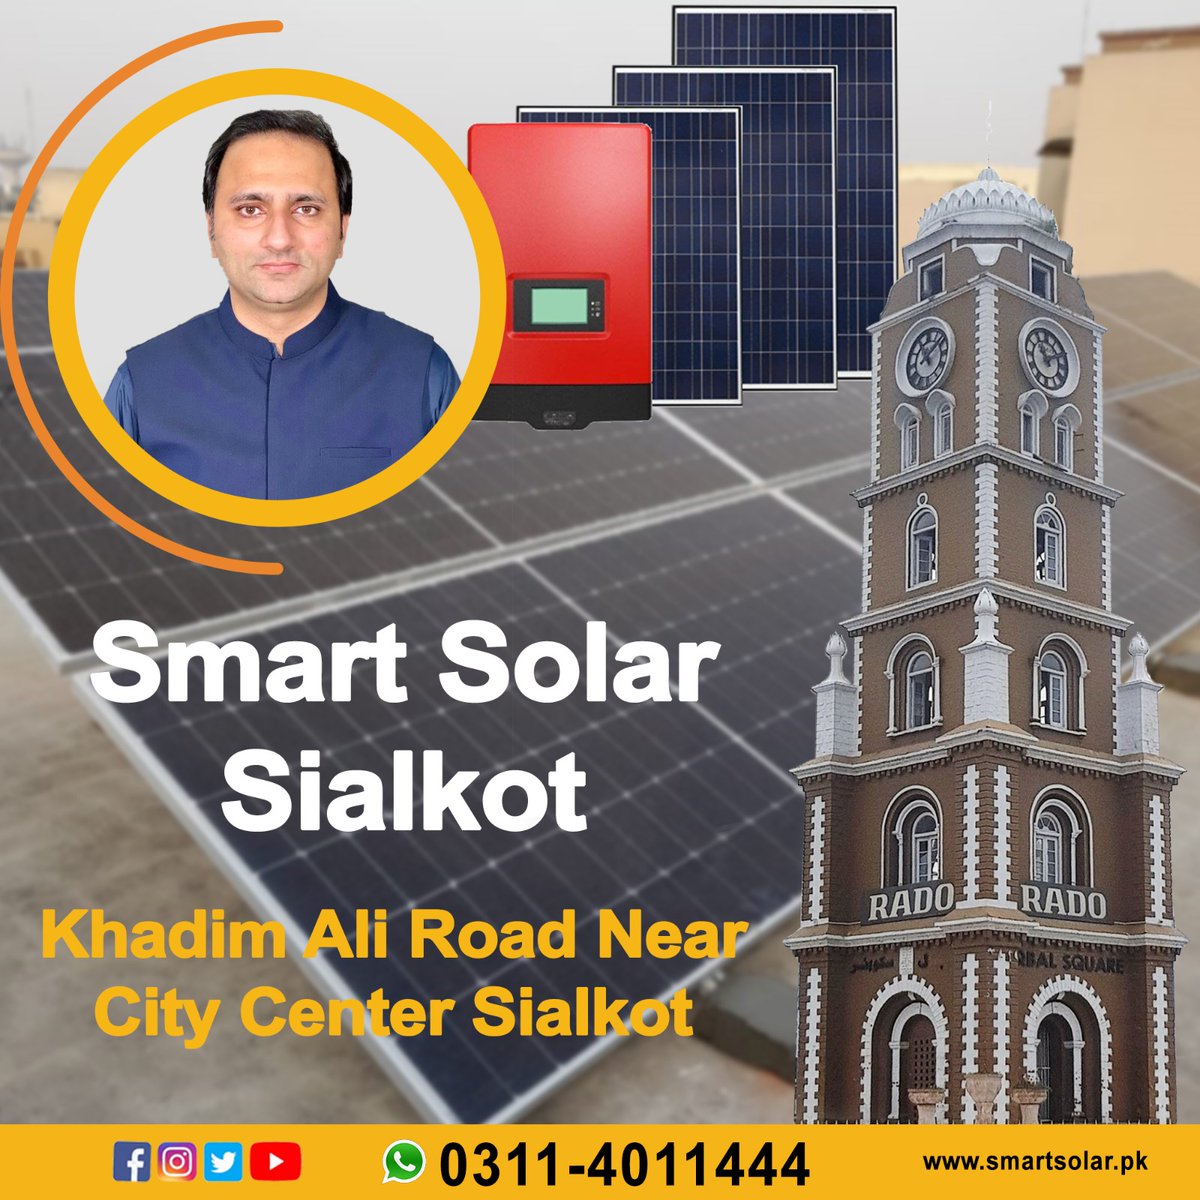 Solar System installed at Sialkot! 
Contact us for price and setup details!
#ChooseSolar #SMARTSOLAR
For more details please contact 0311-4011444
#SmartSolar #Solar #SolarPanels #SolarBatteries #SolarInverters #SolarInstallation #SolarHeater